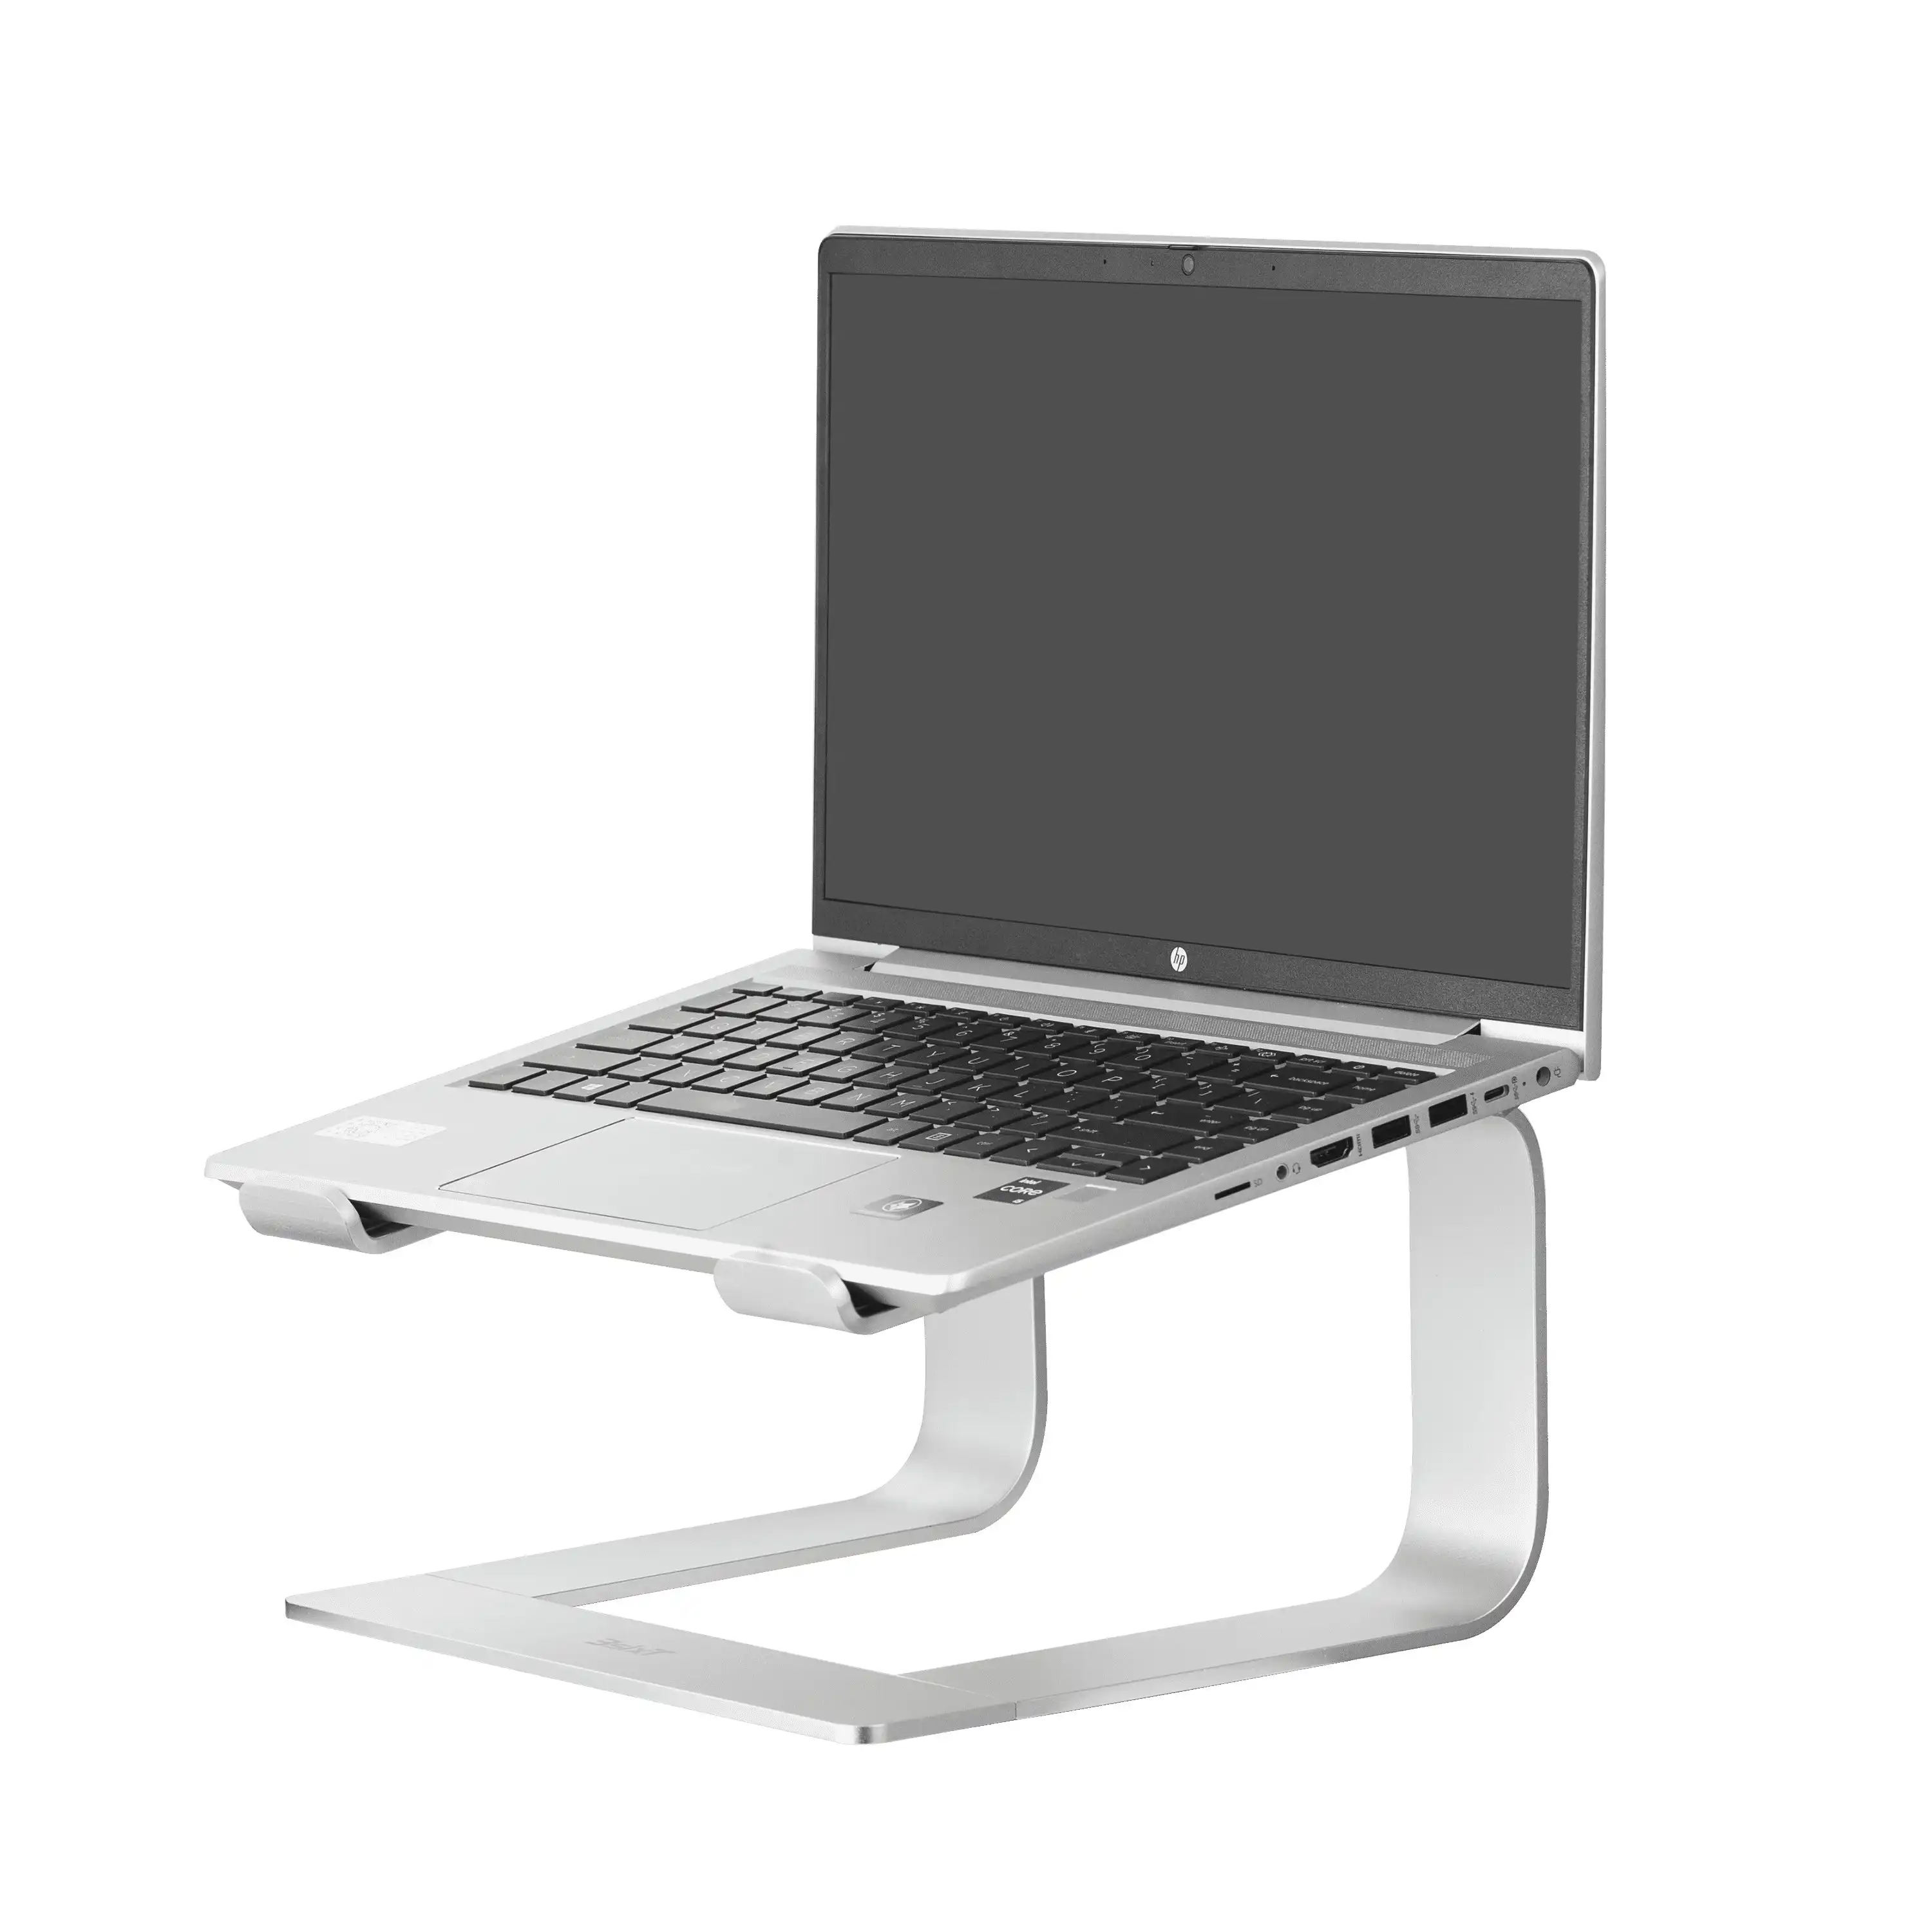 3sixT Laptop Stand - Silver